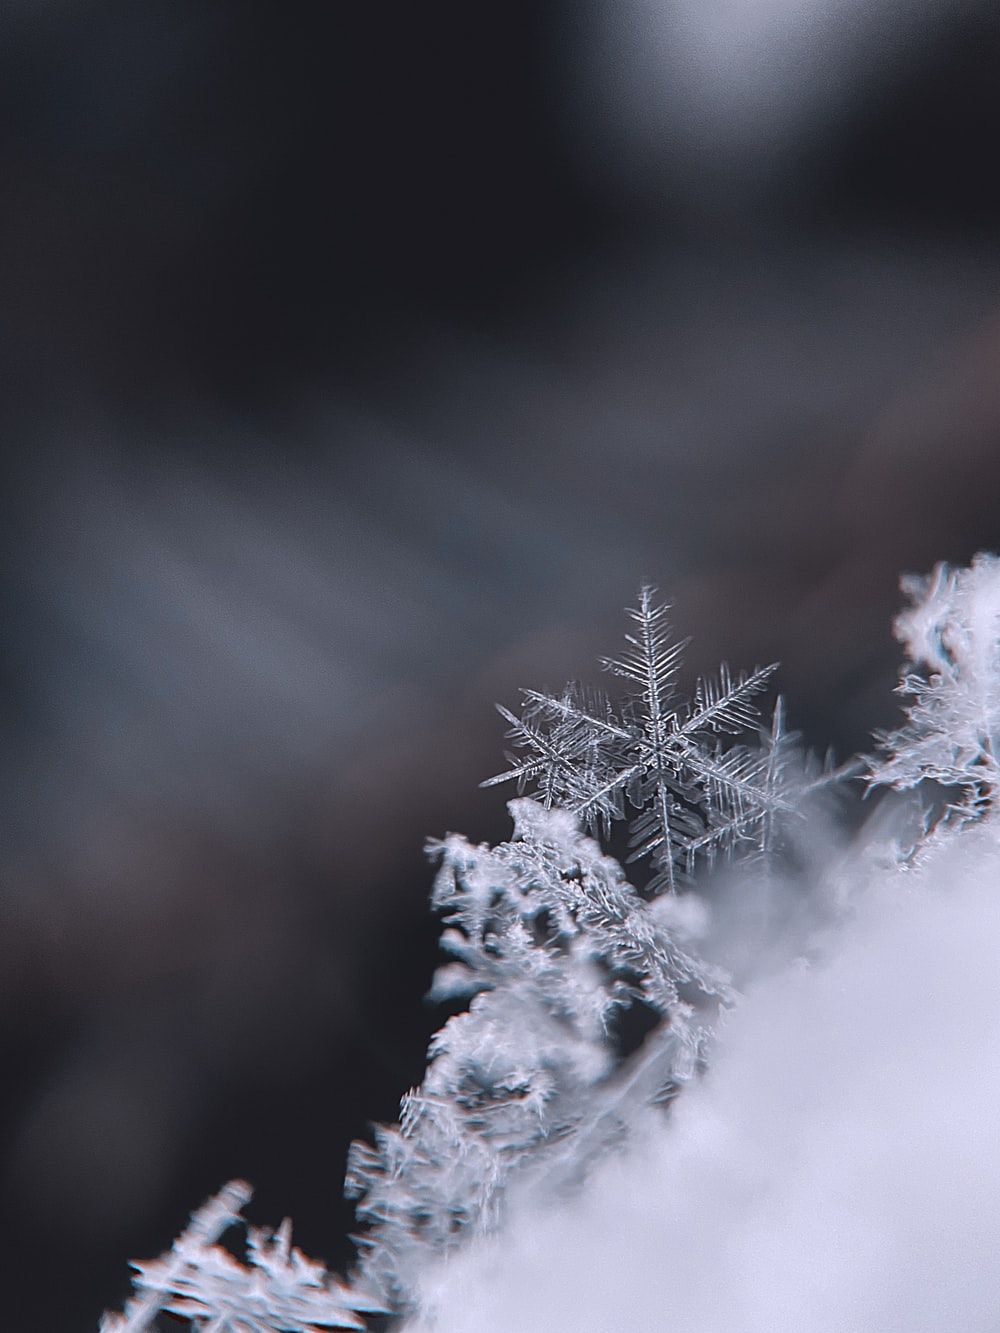 Best Snowflake Picture [HD]. Download Free Image